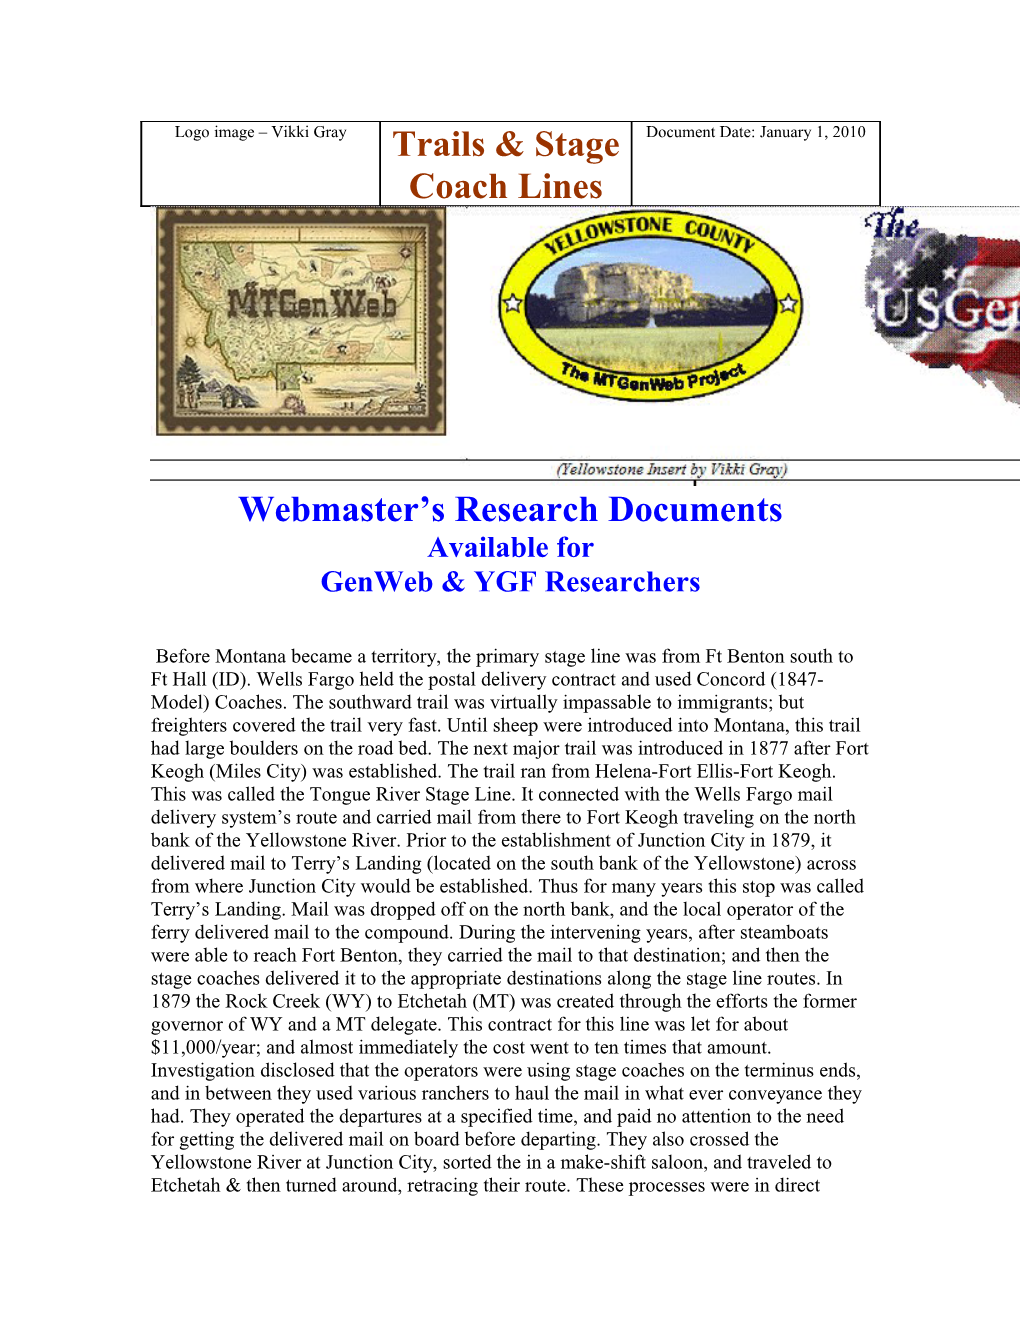 Webmaster S Research Documents